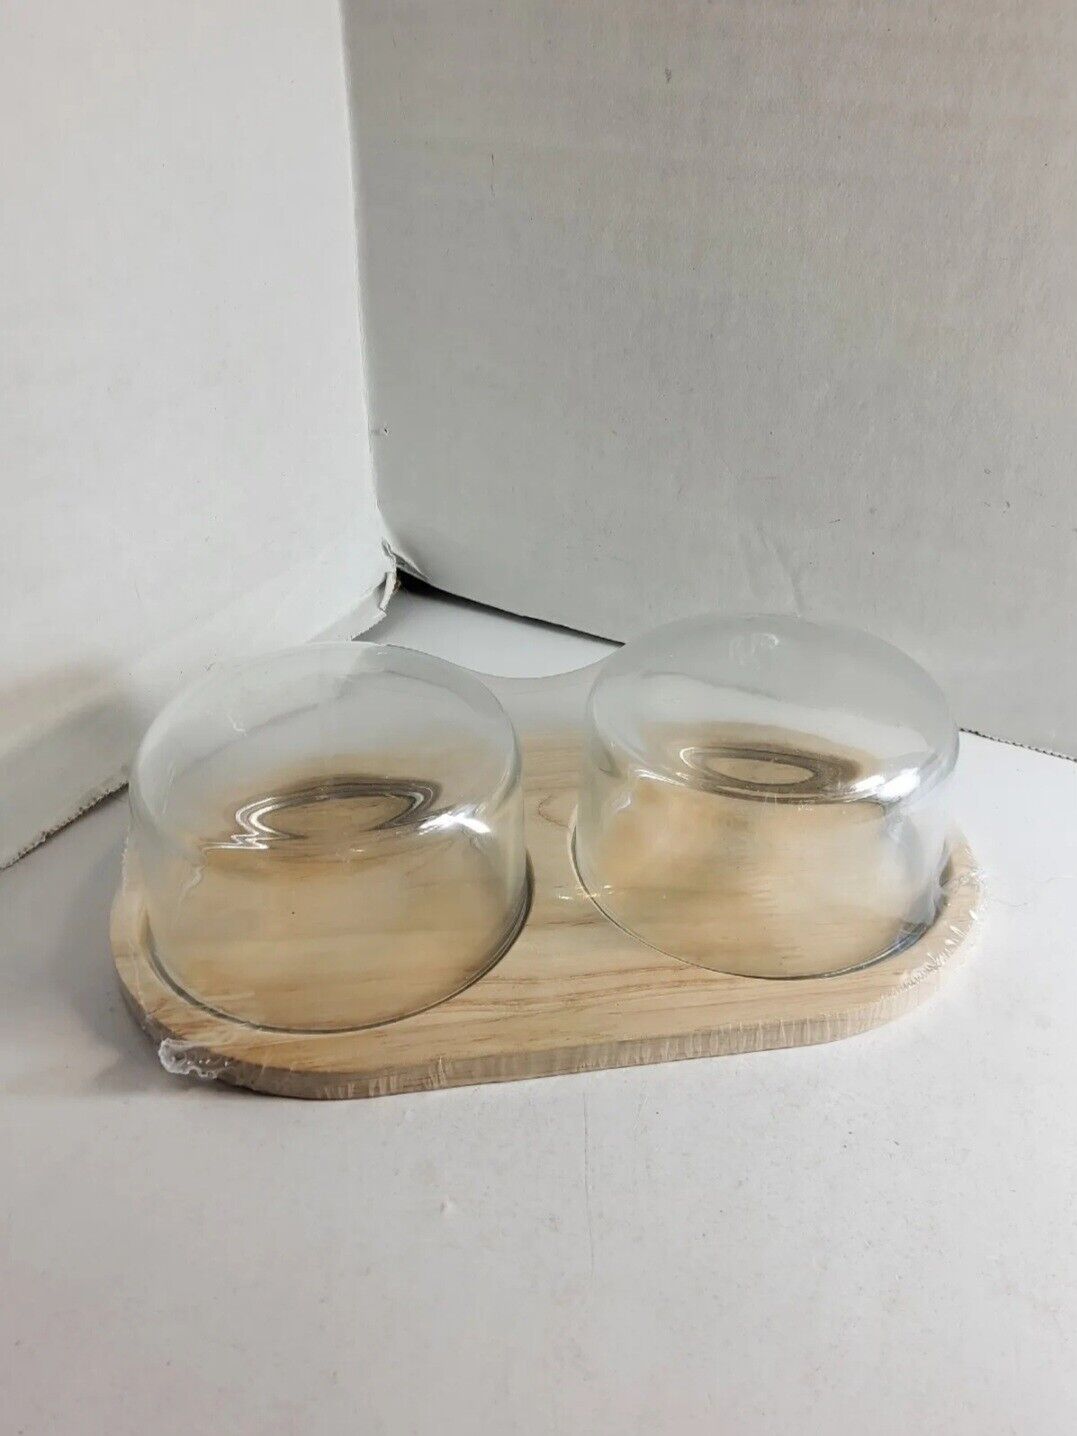 Target HORIZON  Cloche Board Tray with 2 Glass Dome Lids